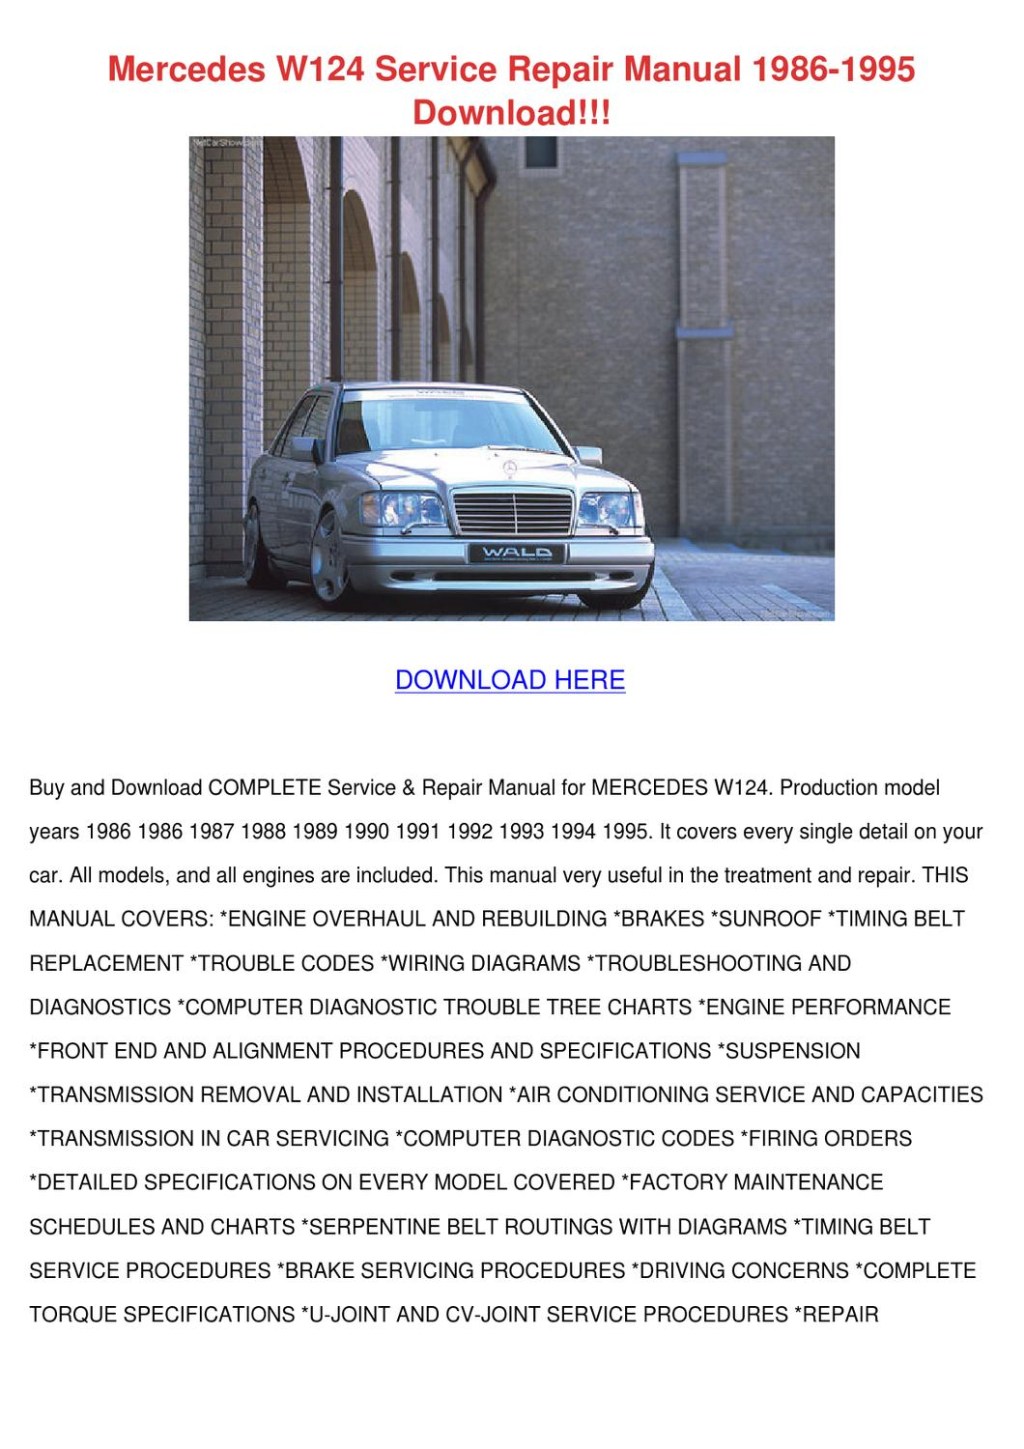 Picture of: Mercedes W Service Repair Manual   by Karima Spinale